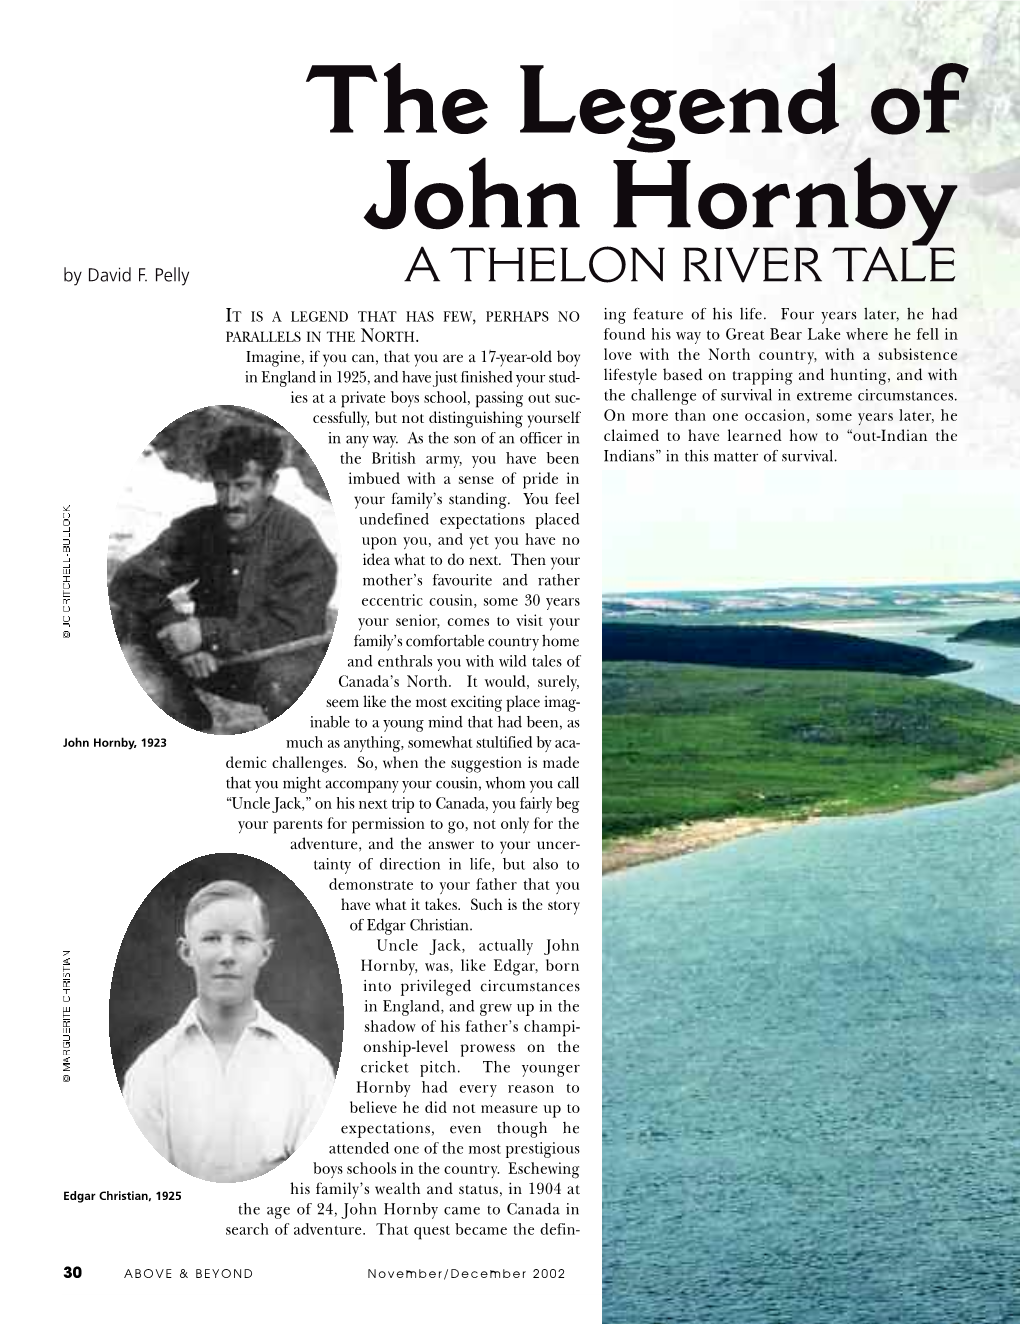 The Legend of John Hornby by David F